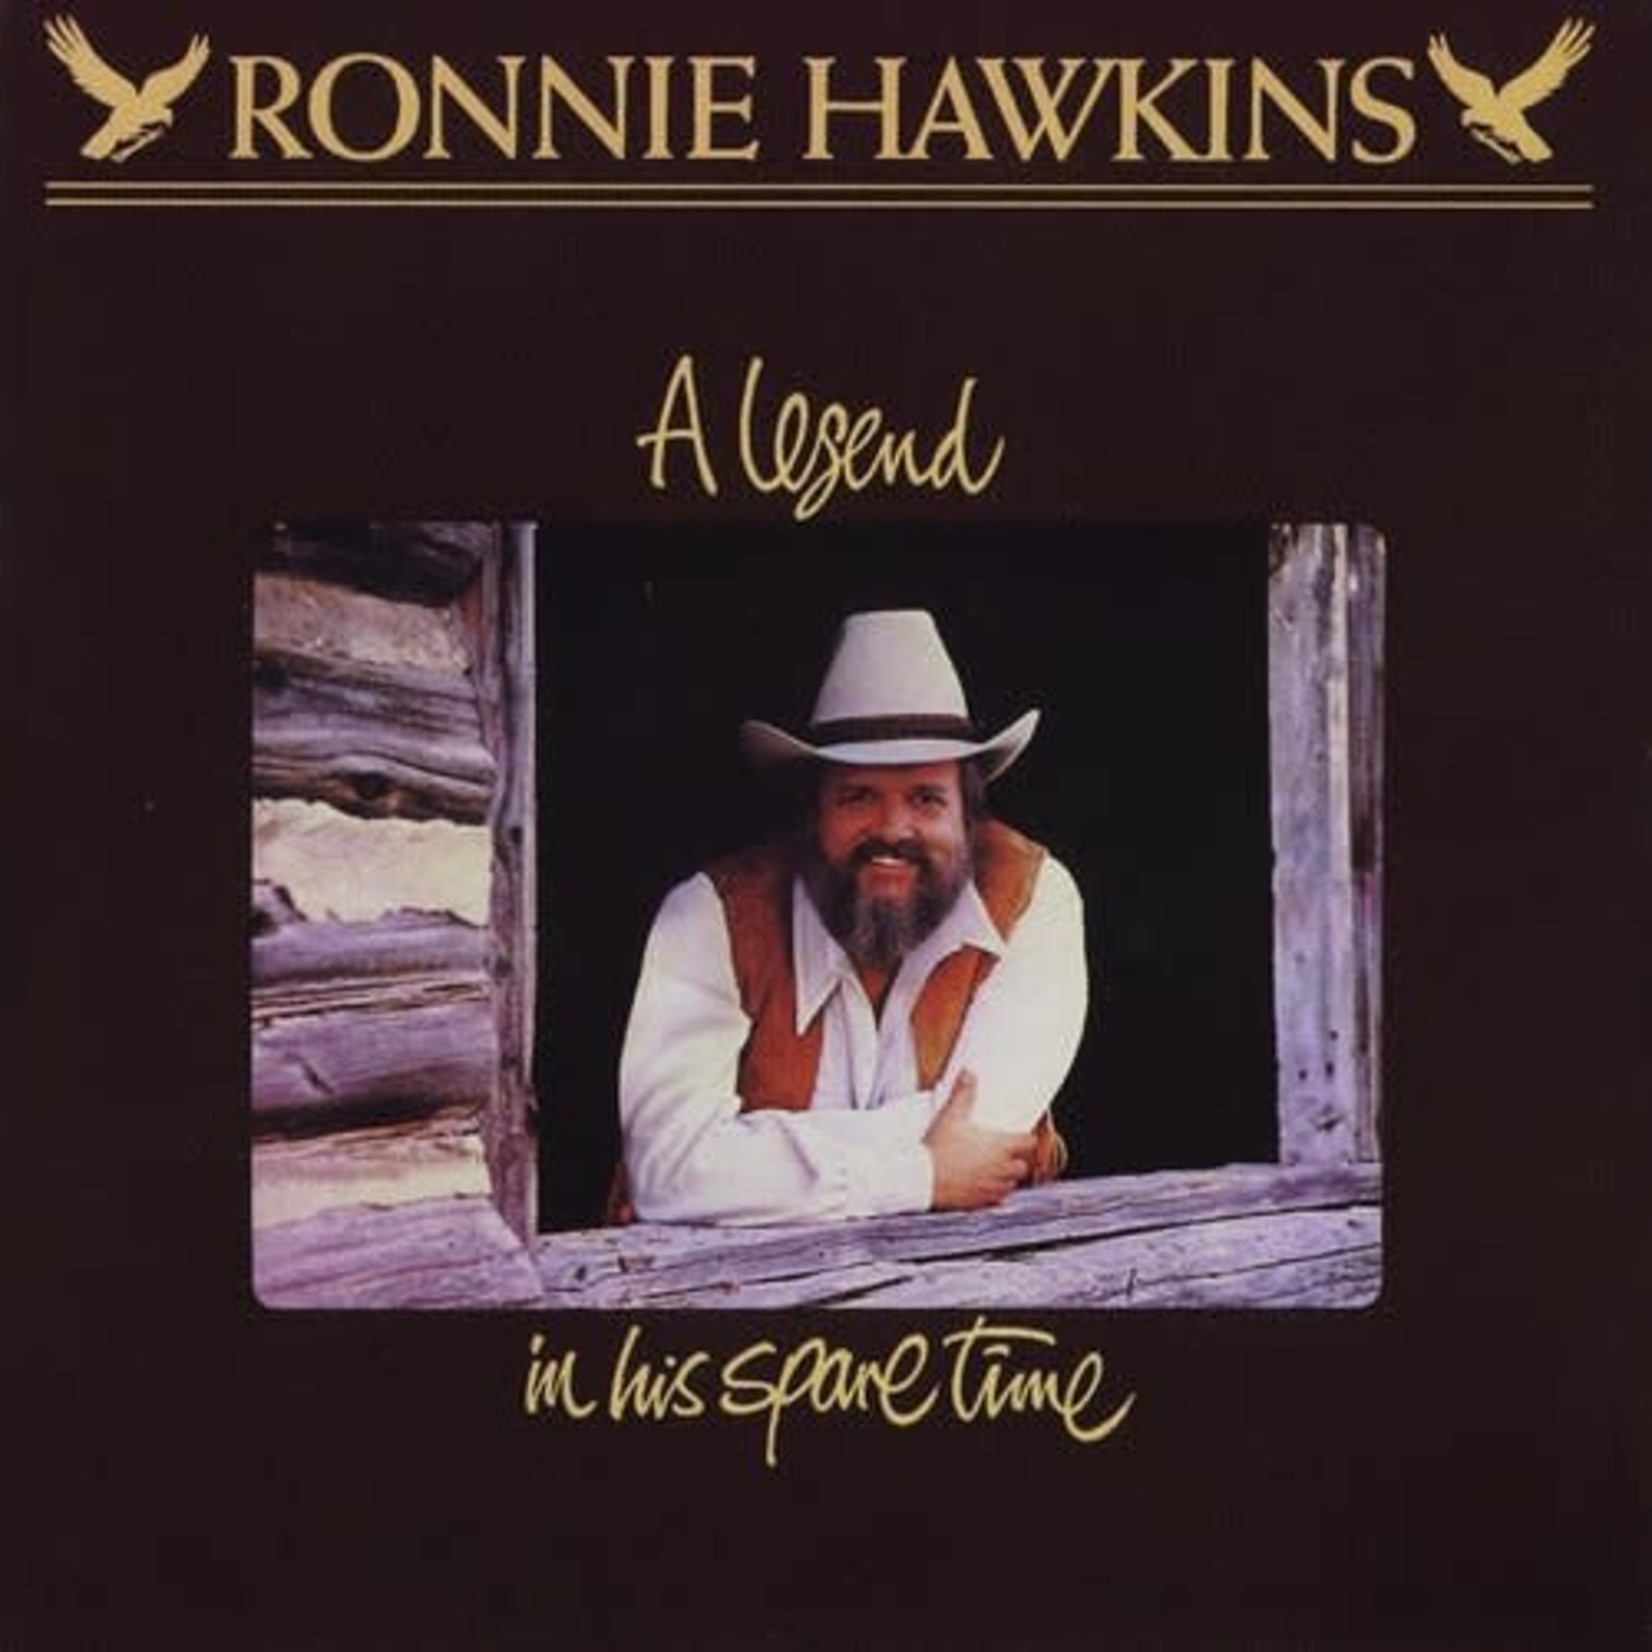 [Vintage] Ronnie Hawkins - A Legend in His Spare Time